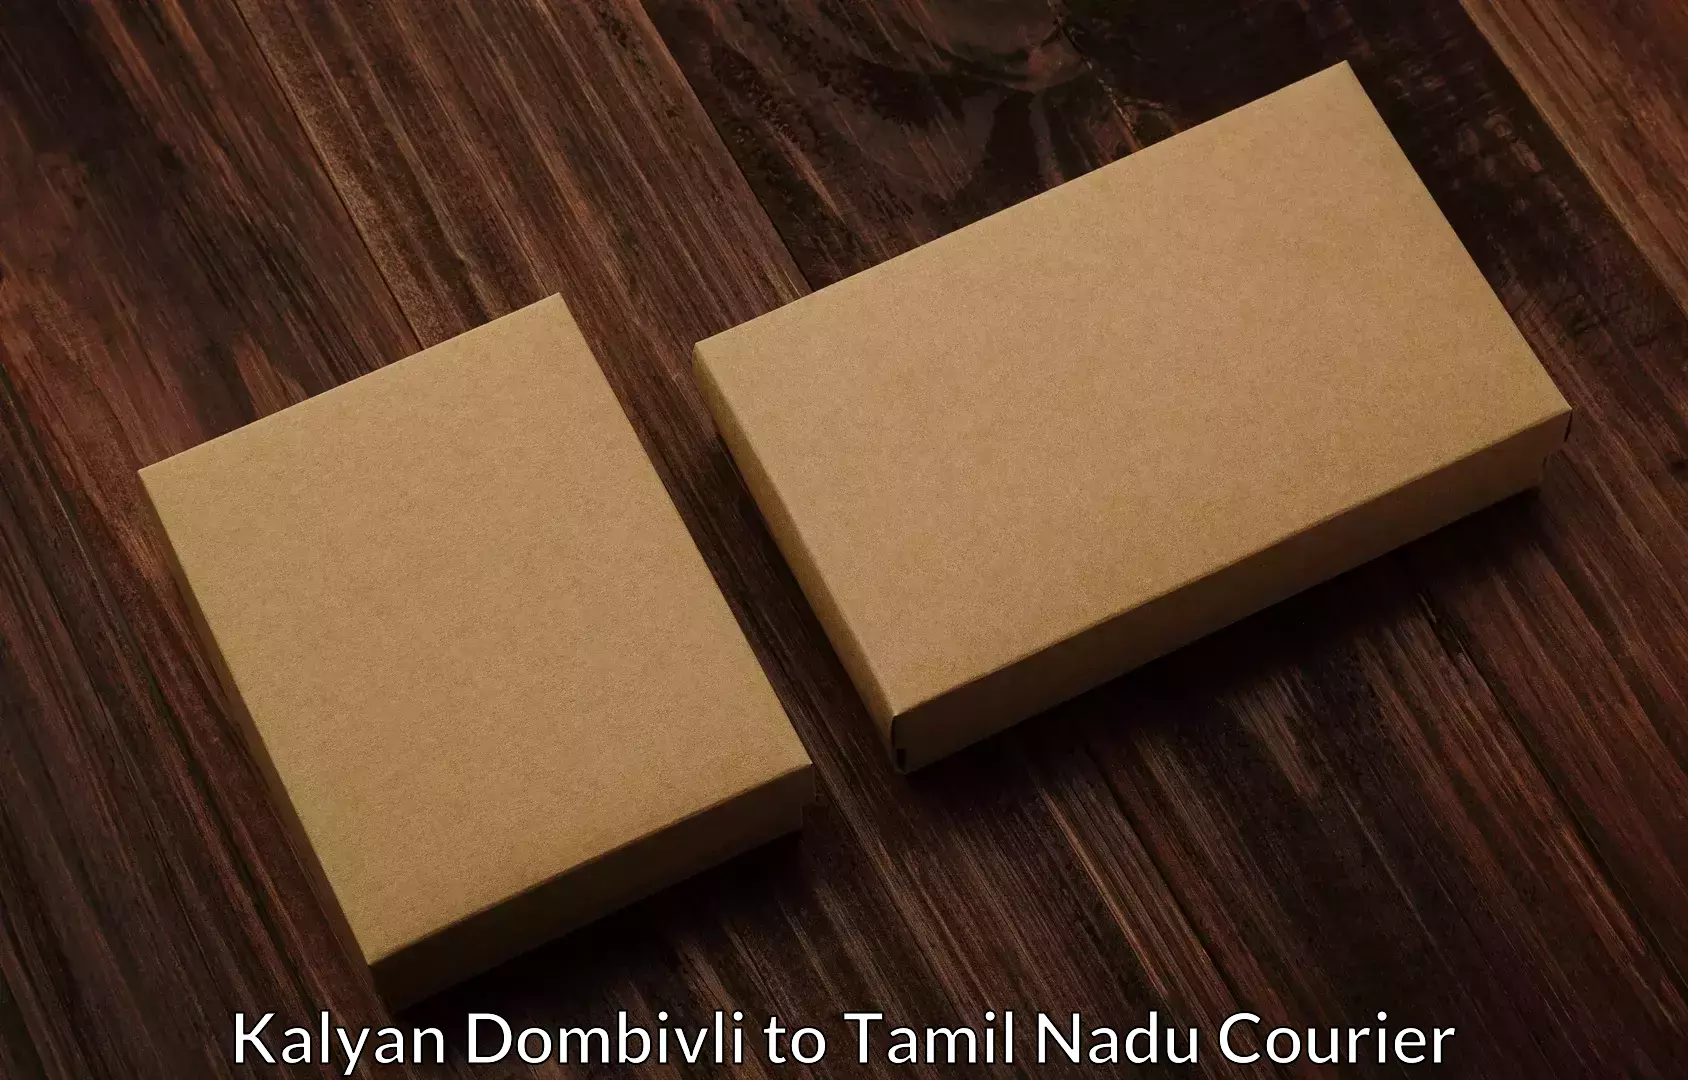 Comprehensive relocation services Kalyan Dombivli to Sivaganga